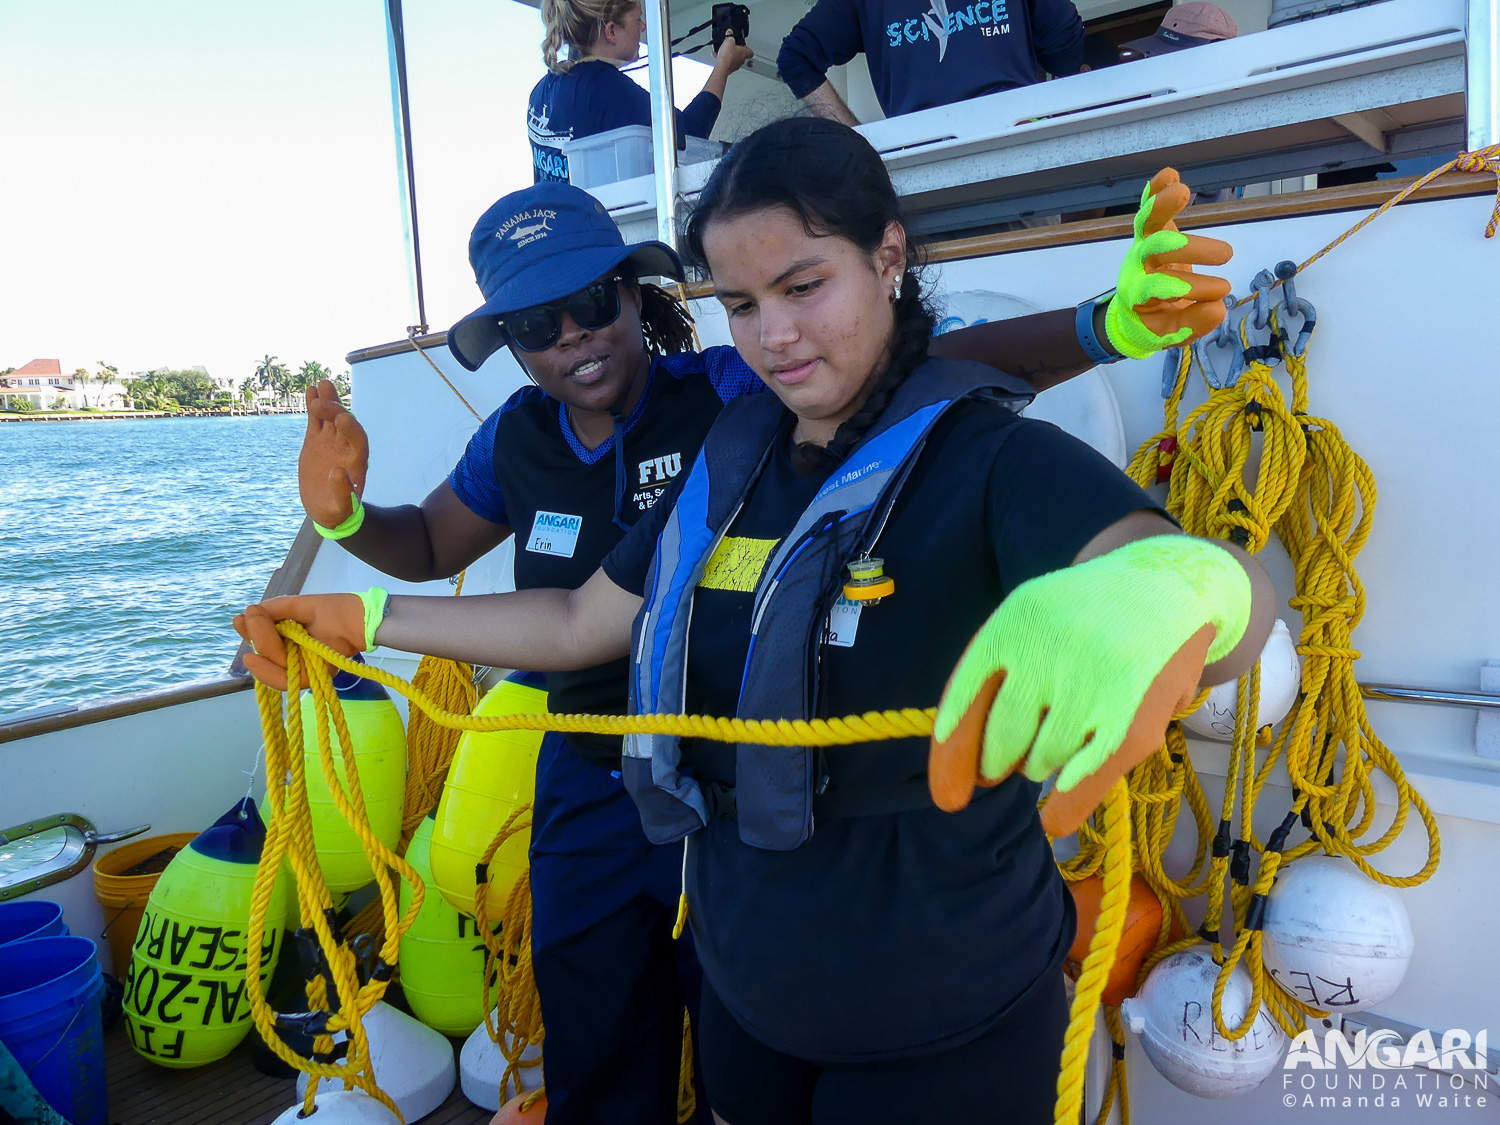 EXP 72: Safe And Effective Line Handling Is An Important Part Of Work Onboard A Research Vessel. Here, A Scientist Shows A Student How To Coil Line So It Is Ready To For Our Next Drumline Deployment. PC: Amanda Waite